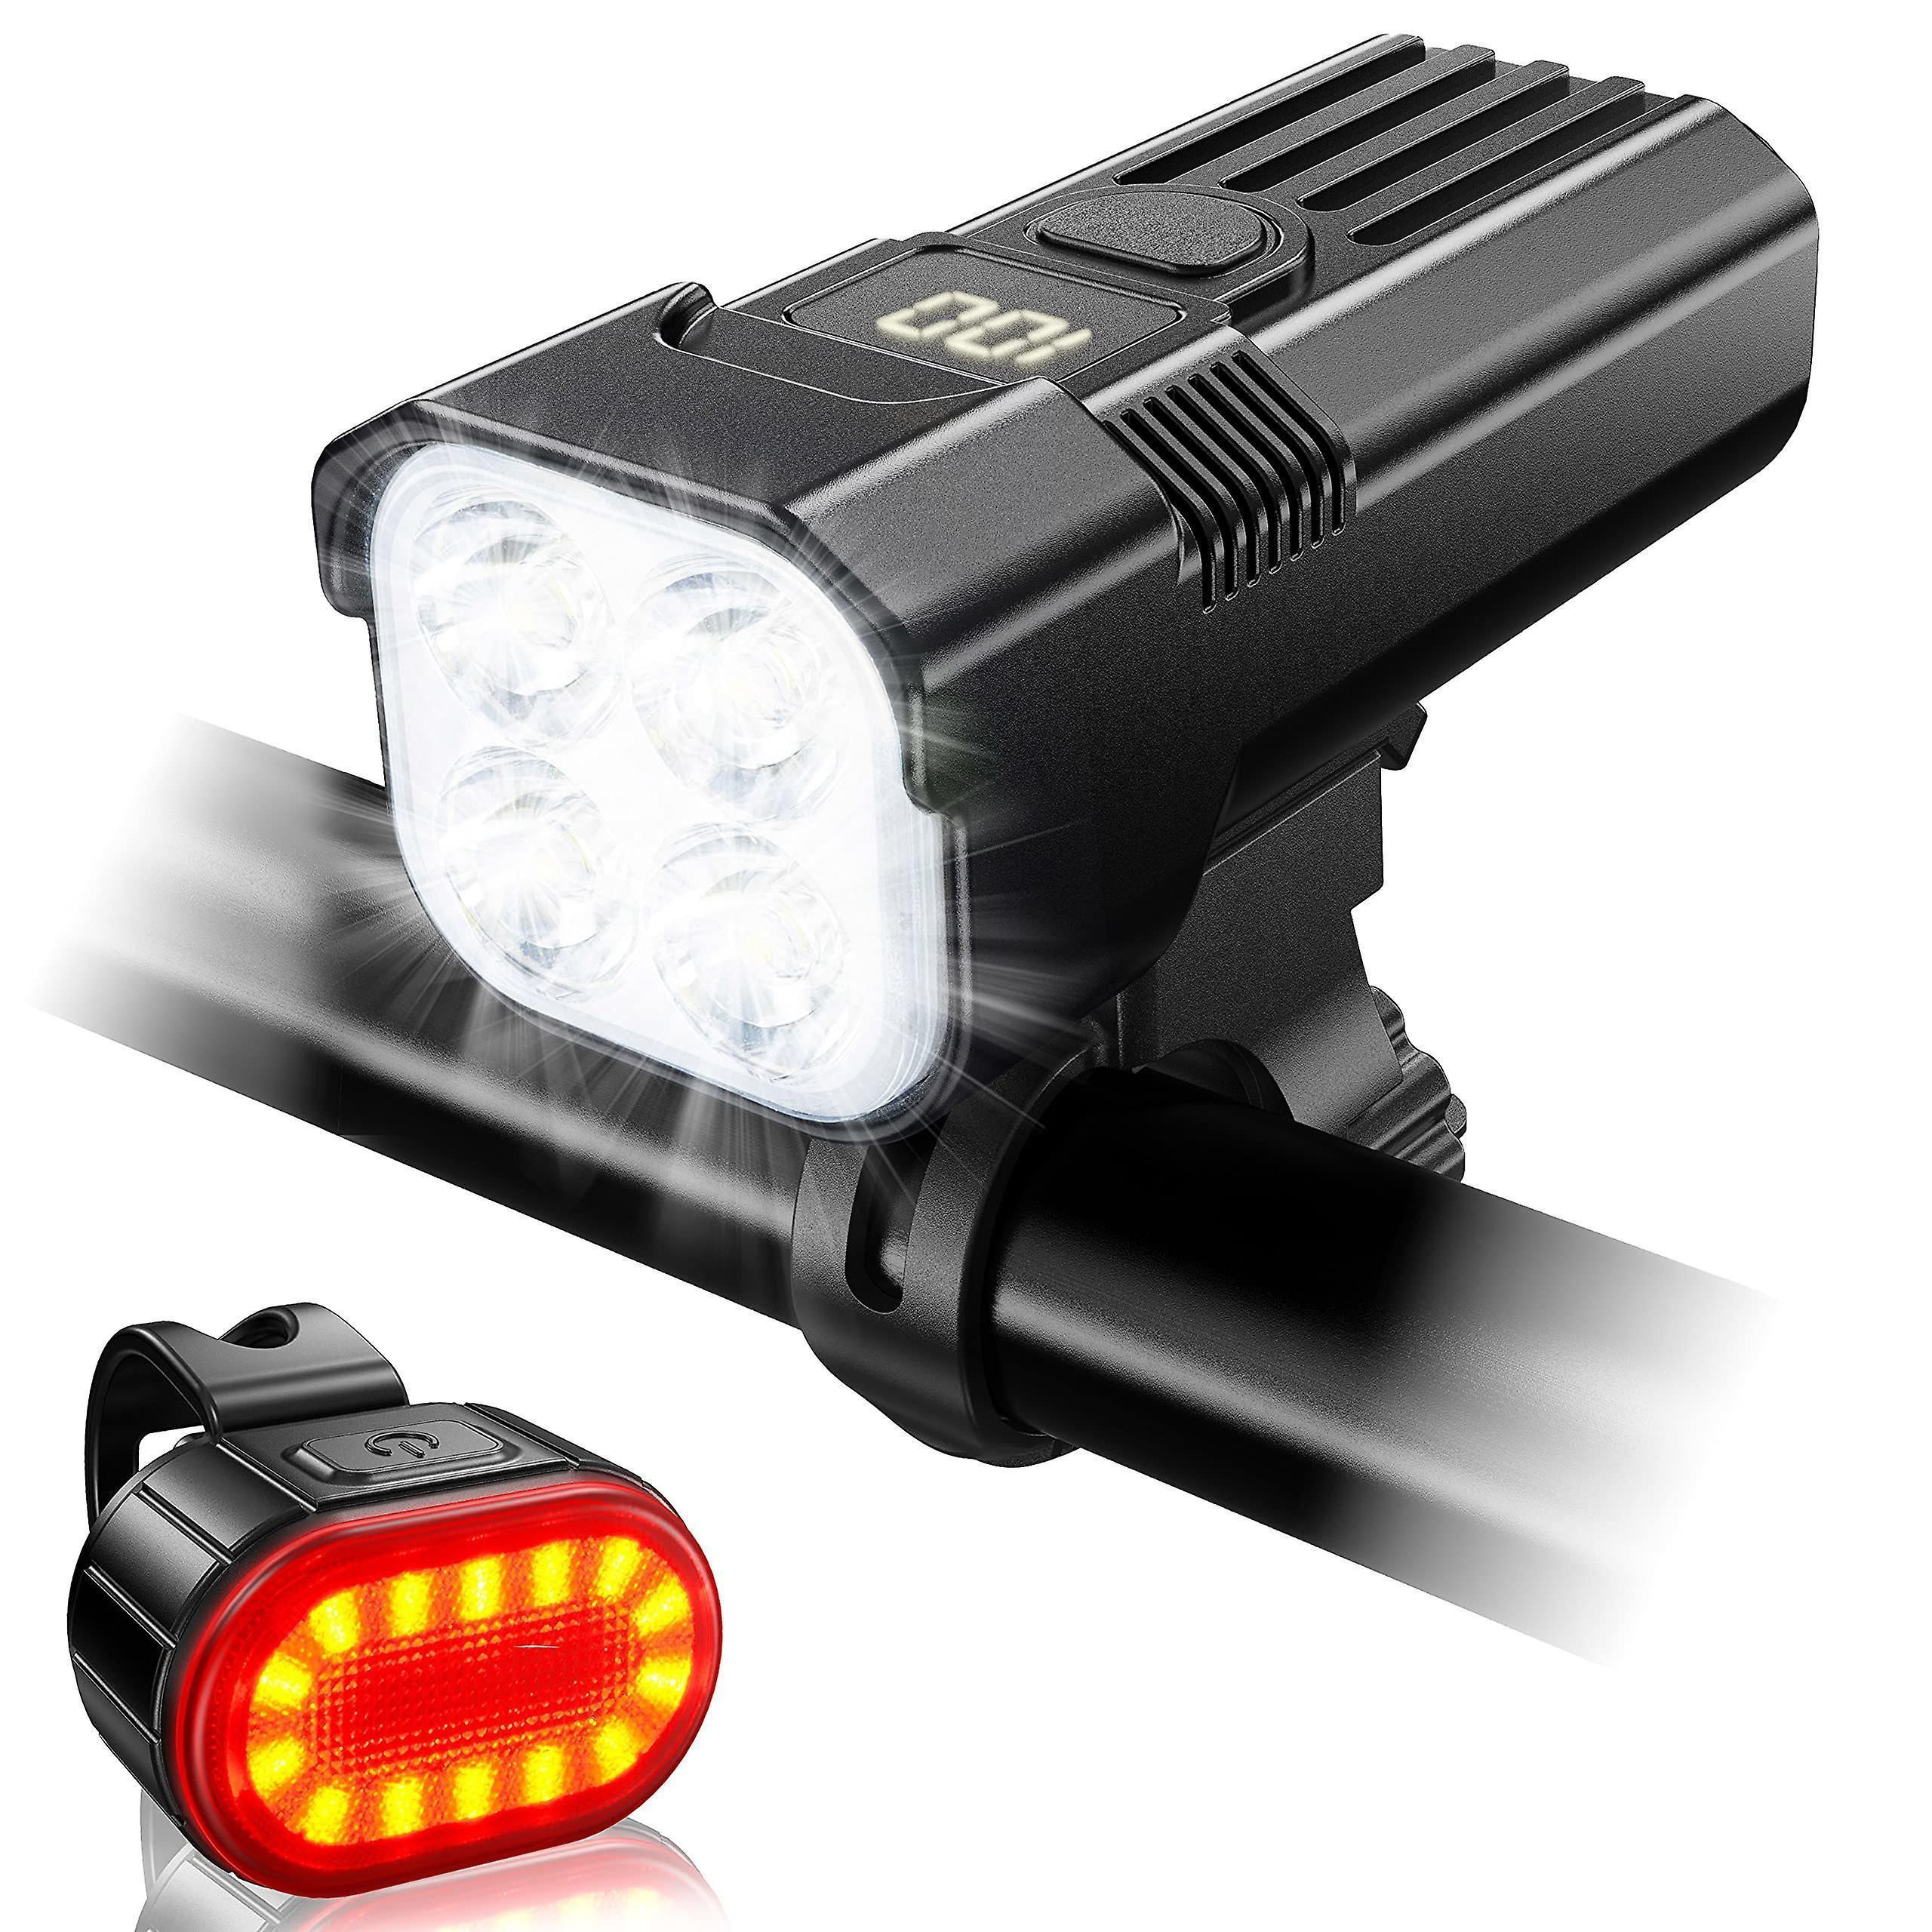 Bike Lights Set, Super Bright 2000 Lumen Front Cycling Light, Durable IP65 Waterproof - USB Rechargeable with 6 Modes Red Rear Light（black）